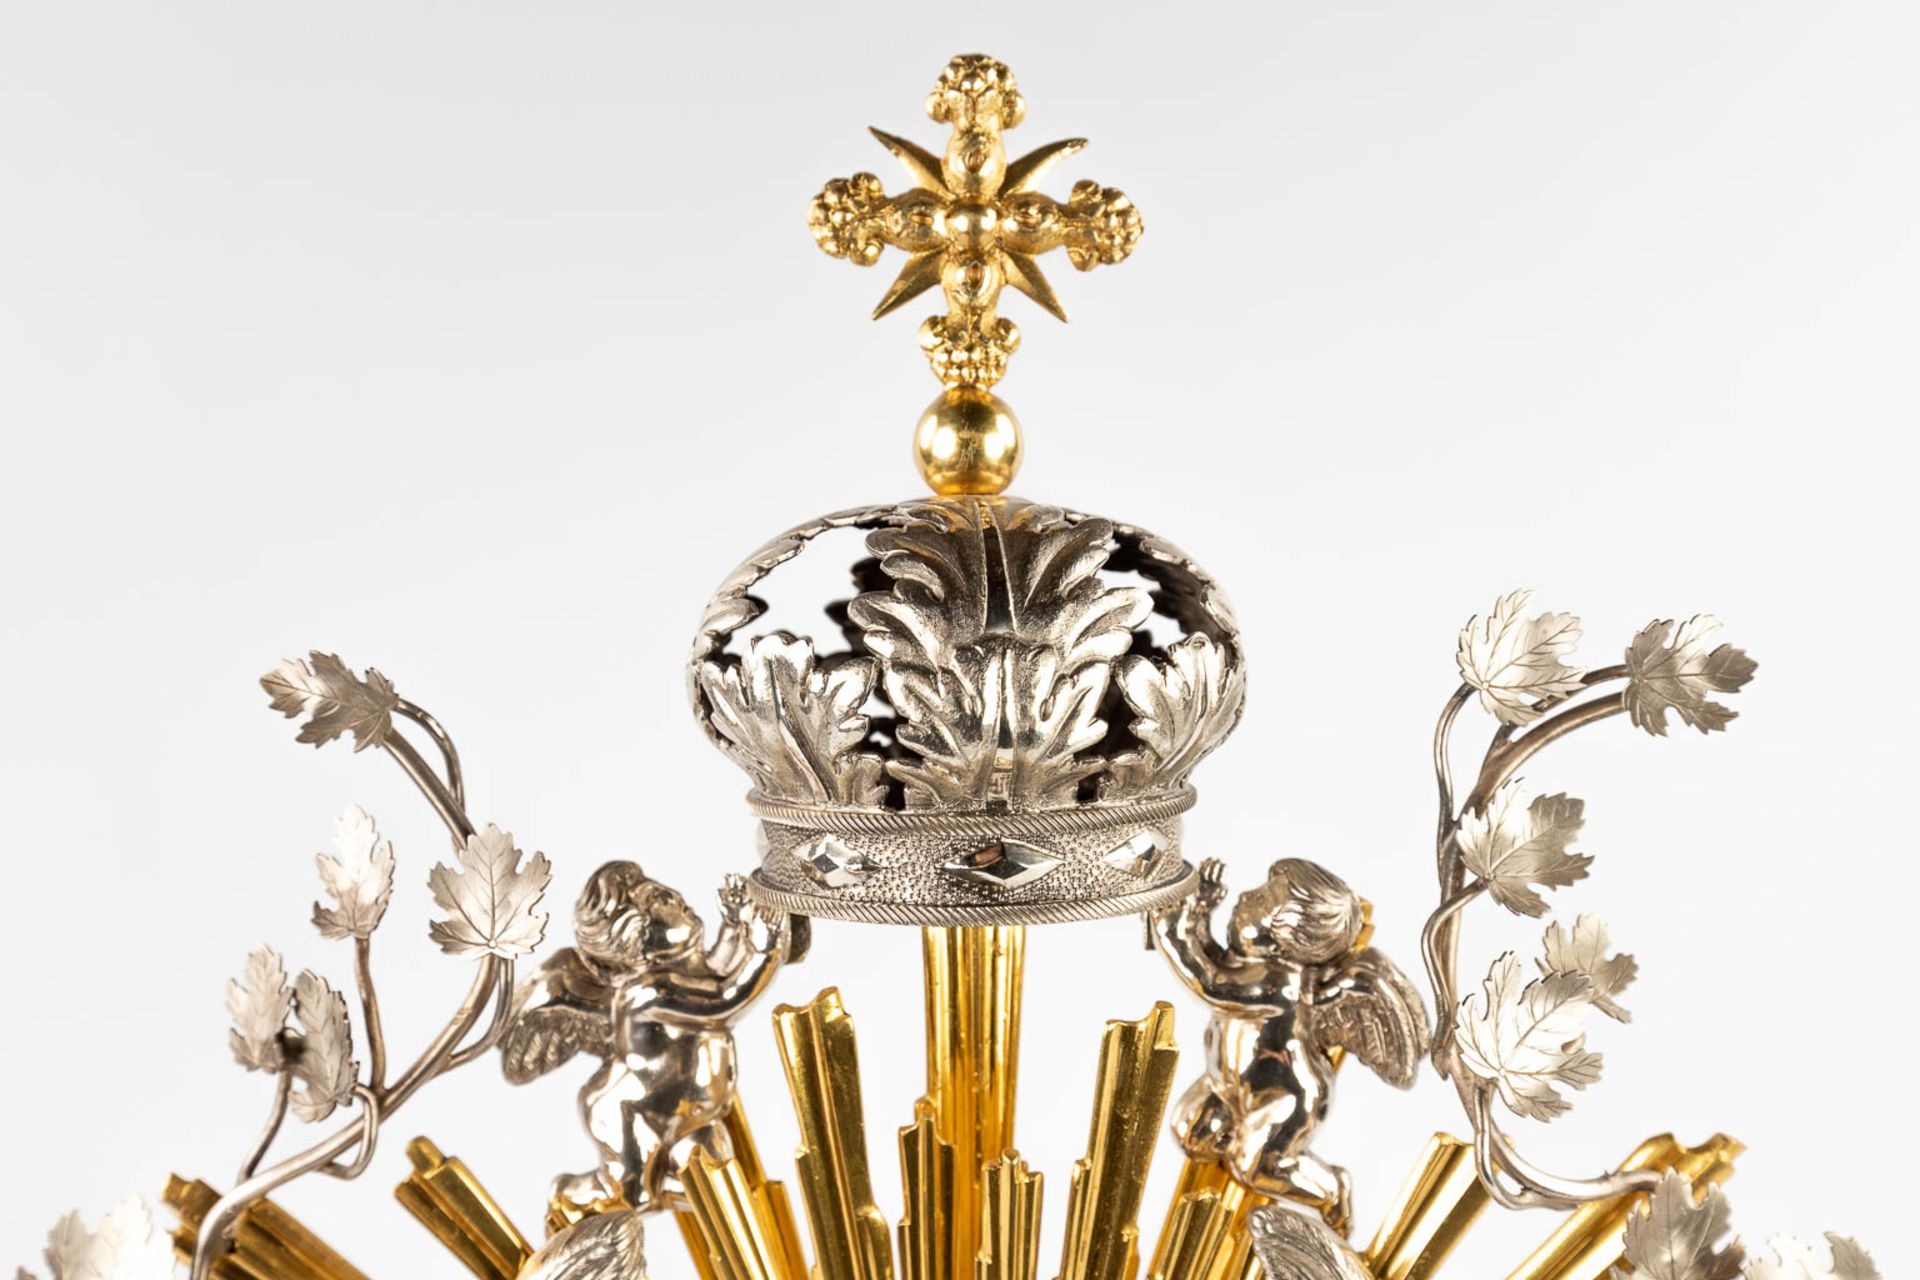 A sunburst monstrance, silver, decorated with angels, wheat and grape vines. Belgium, 19th C. (D:20 - Image 7 of 22